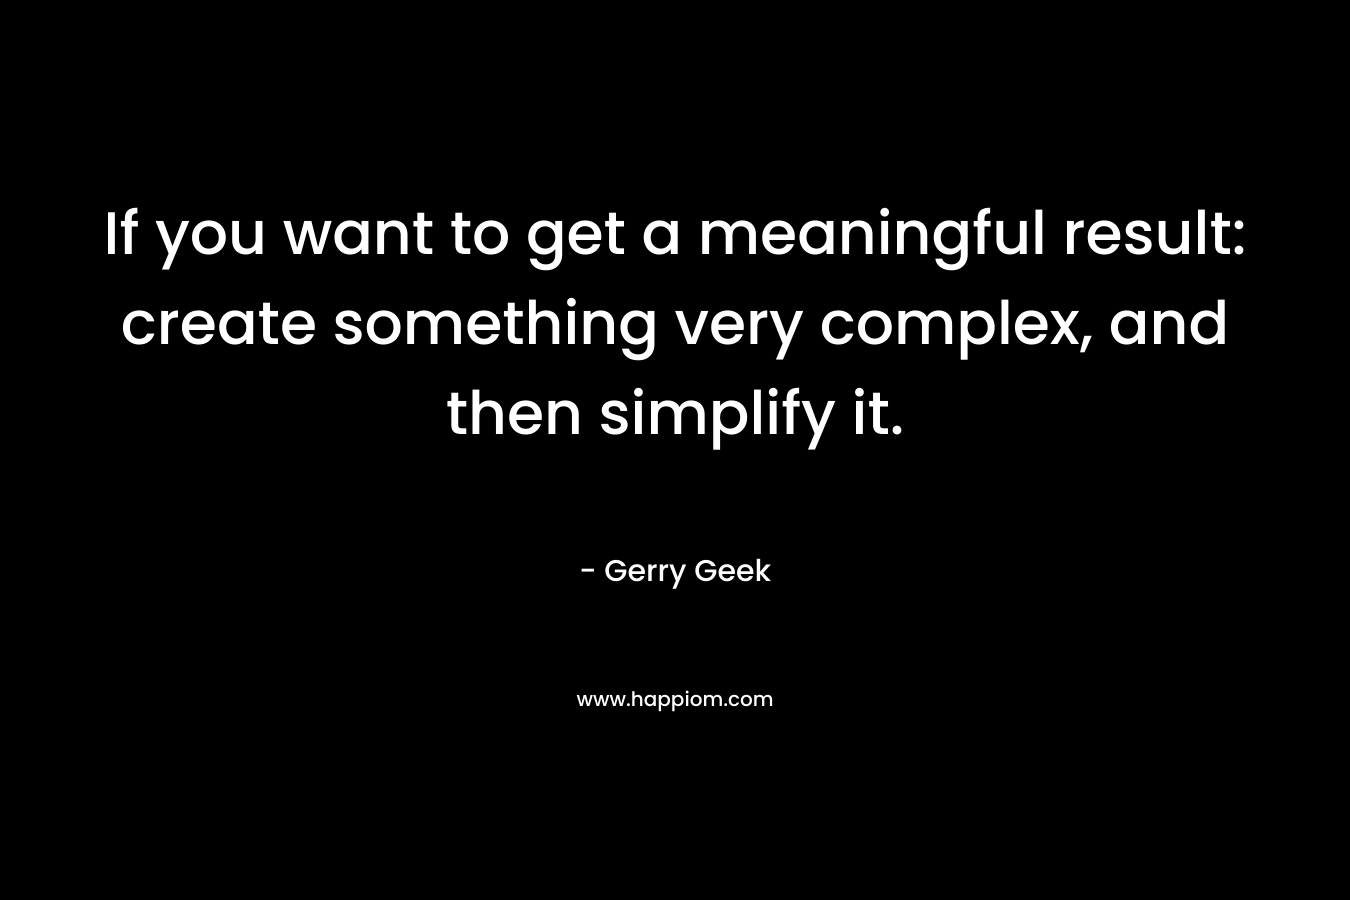 If you want to get a meaningful result: create something very complex, and then simplify it. – Gerry Geek